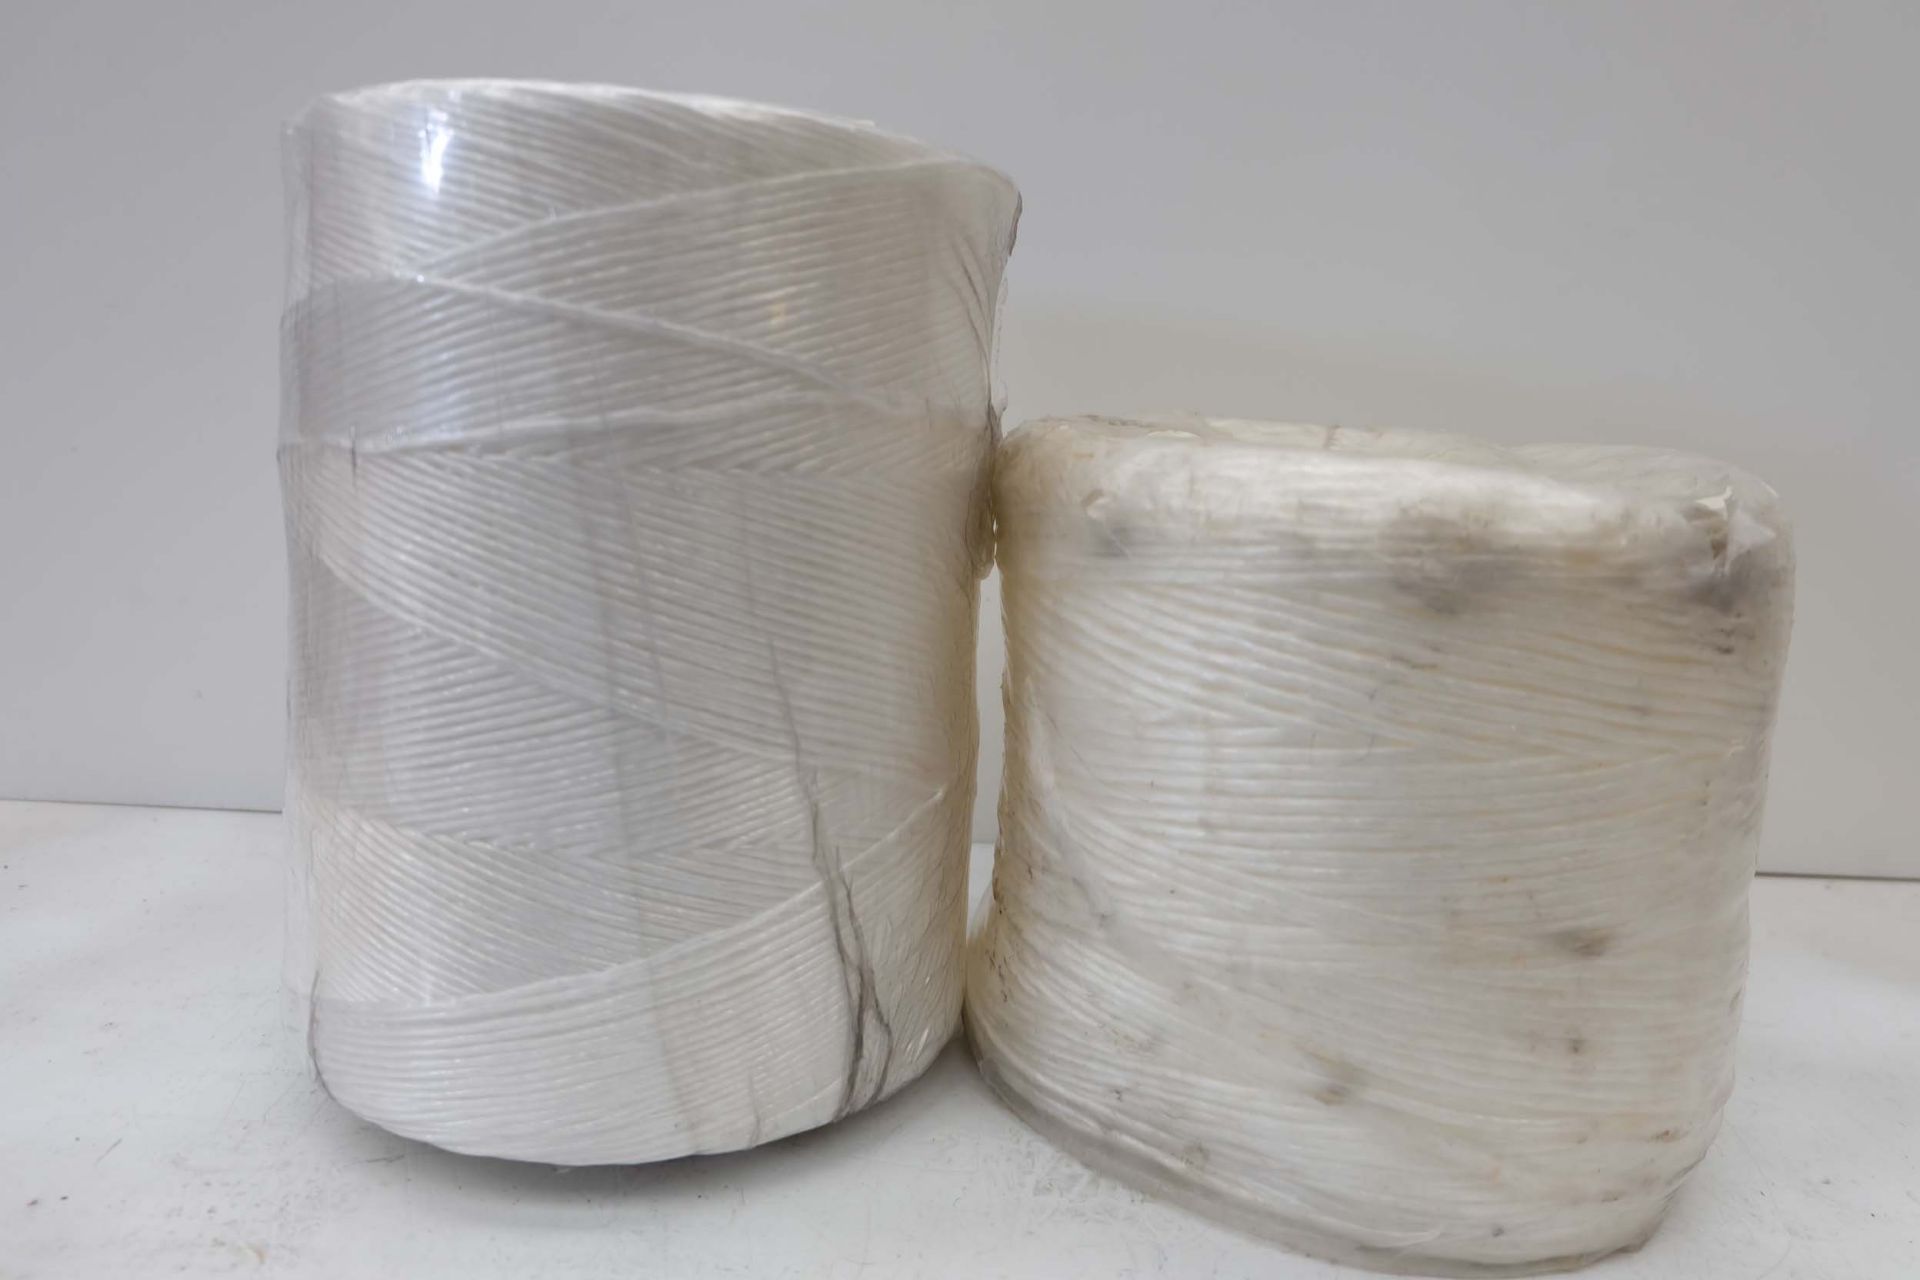 1 x Full & 1 x Part Rolls of Natural String. - Image 2 of 4